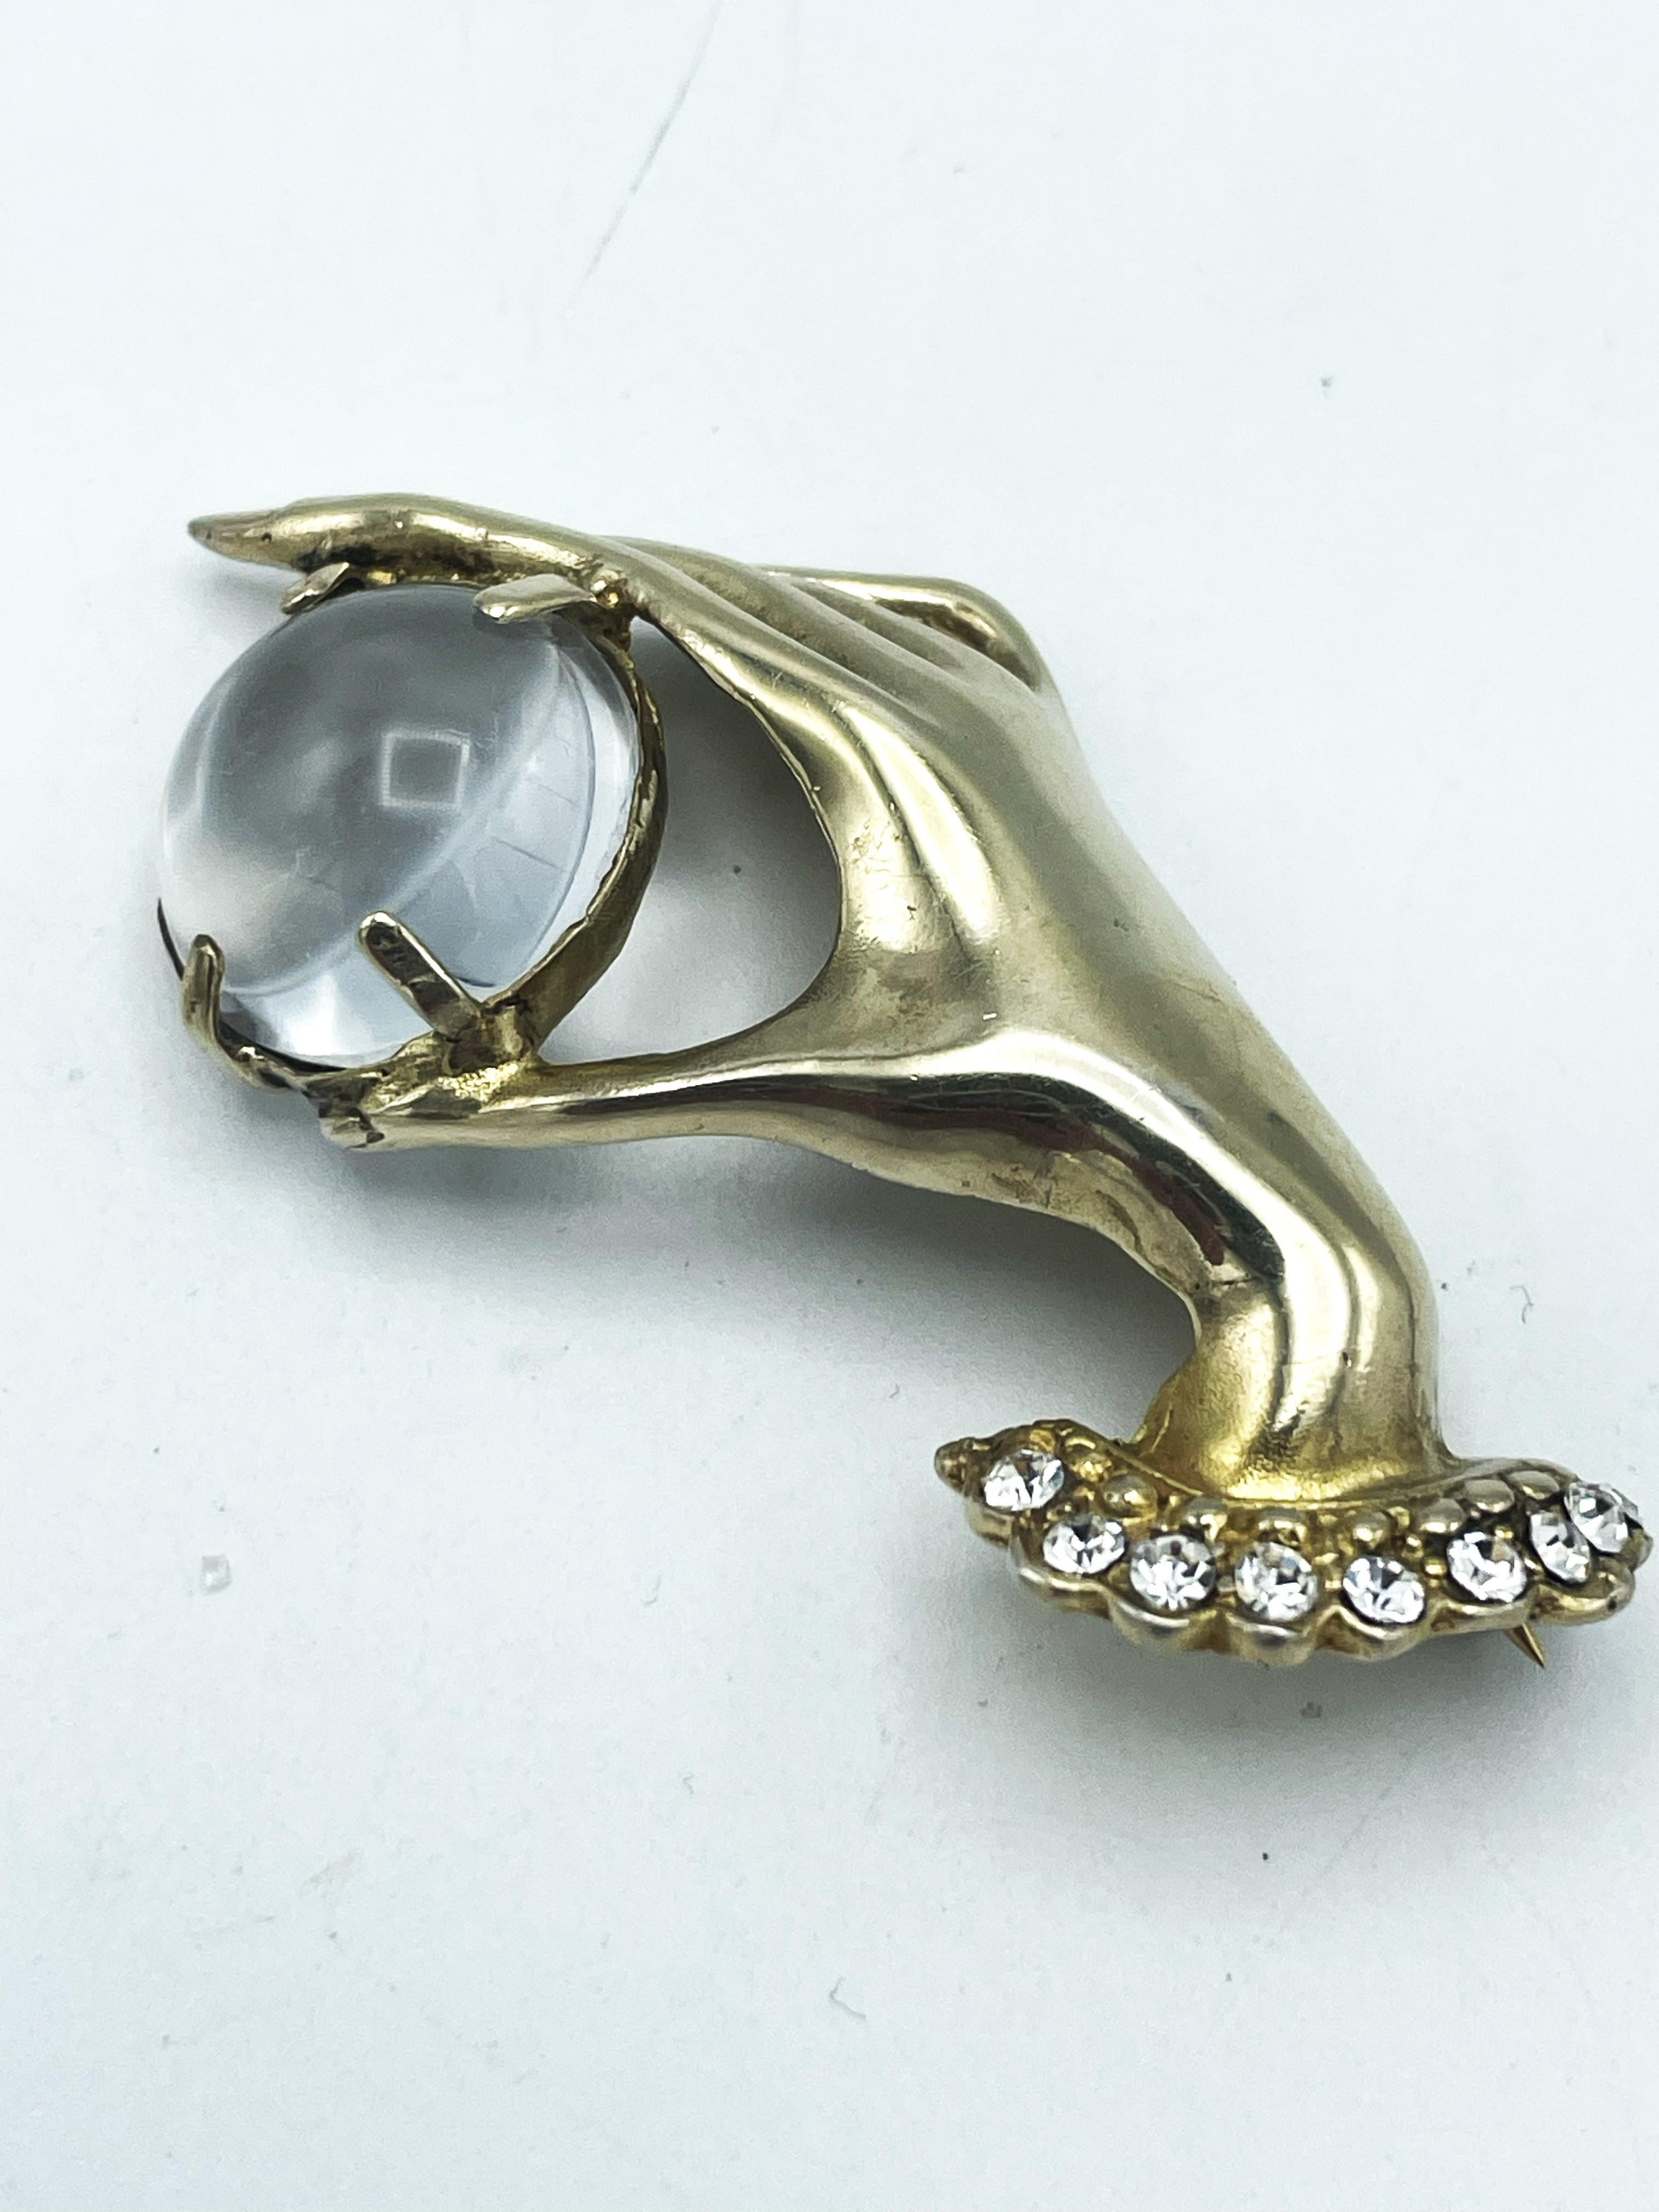 A brooch in the shape of an elegant, slender hand holding a Jelly Belly ball between thumb and forefinger. Below the wrist there is a ruffle decorated with rhinestones. 
Measurement
Brooch width 6 cm  Height 3 cm. Deep 1 cm 

Features
- Signed